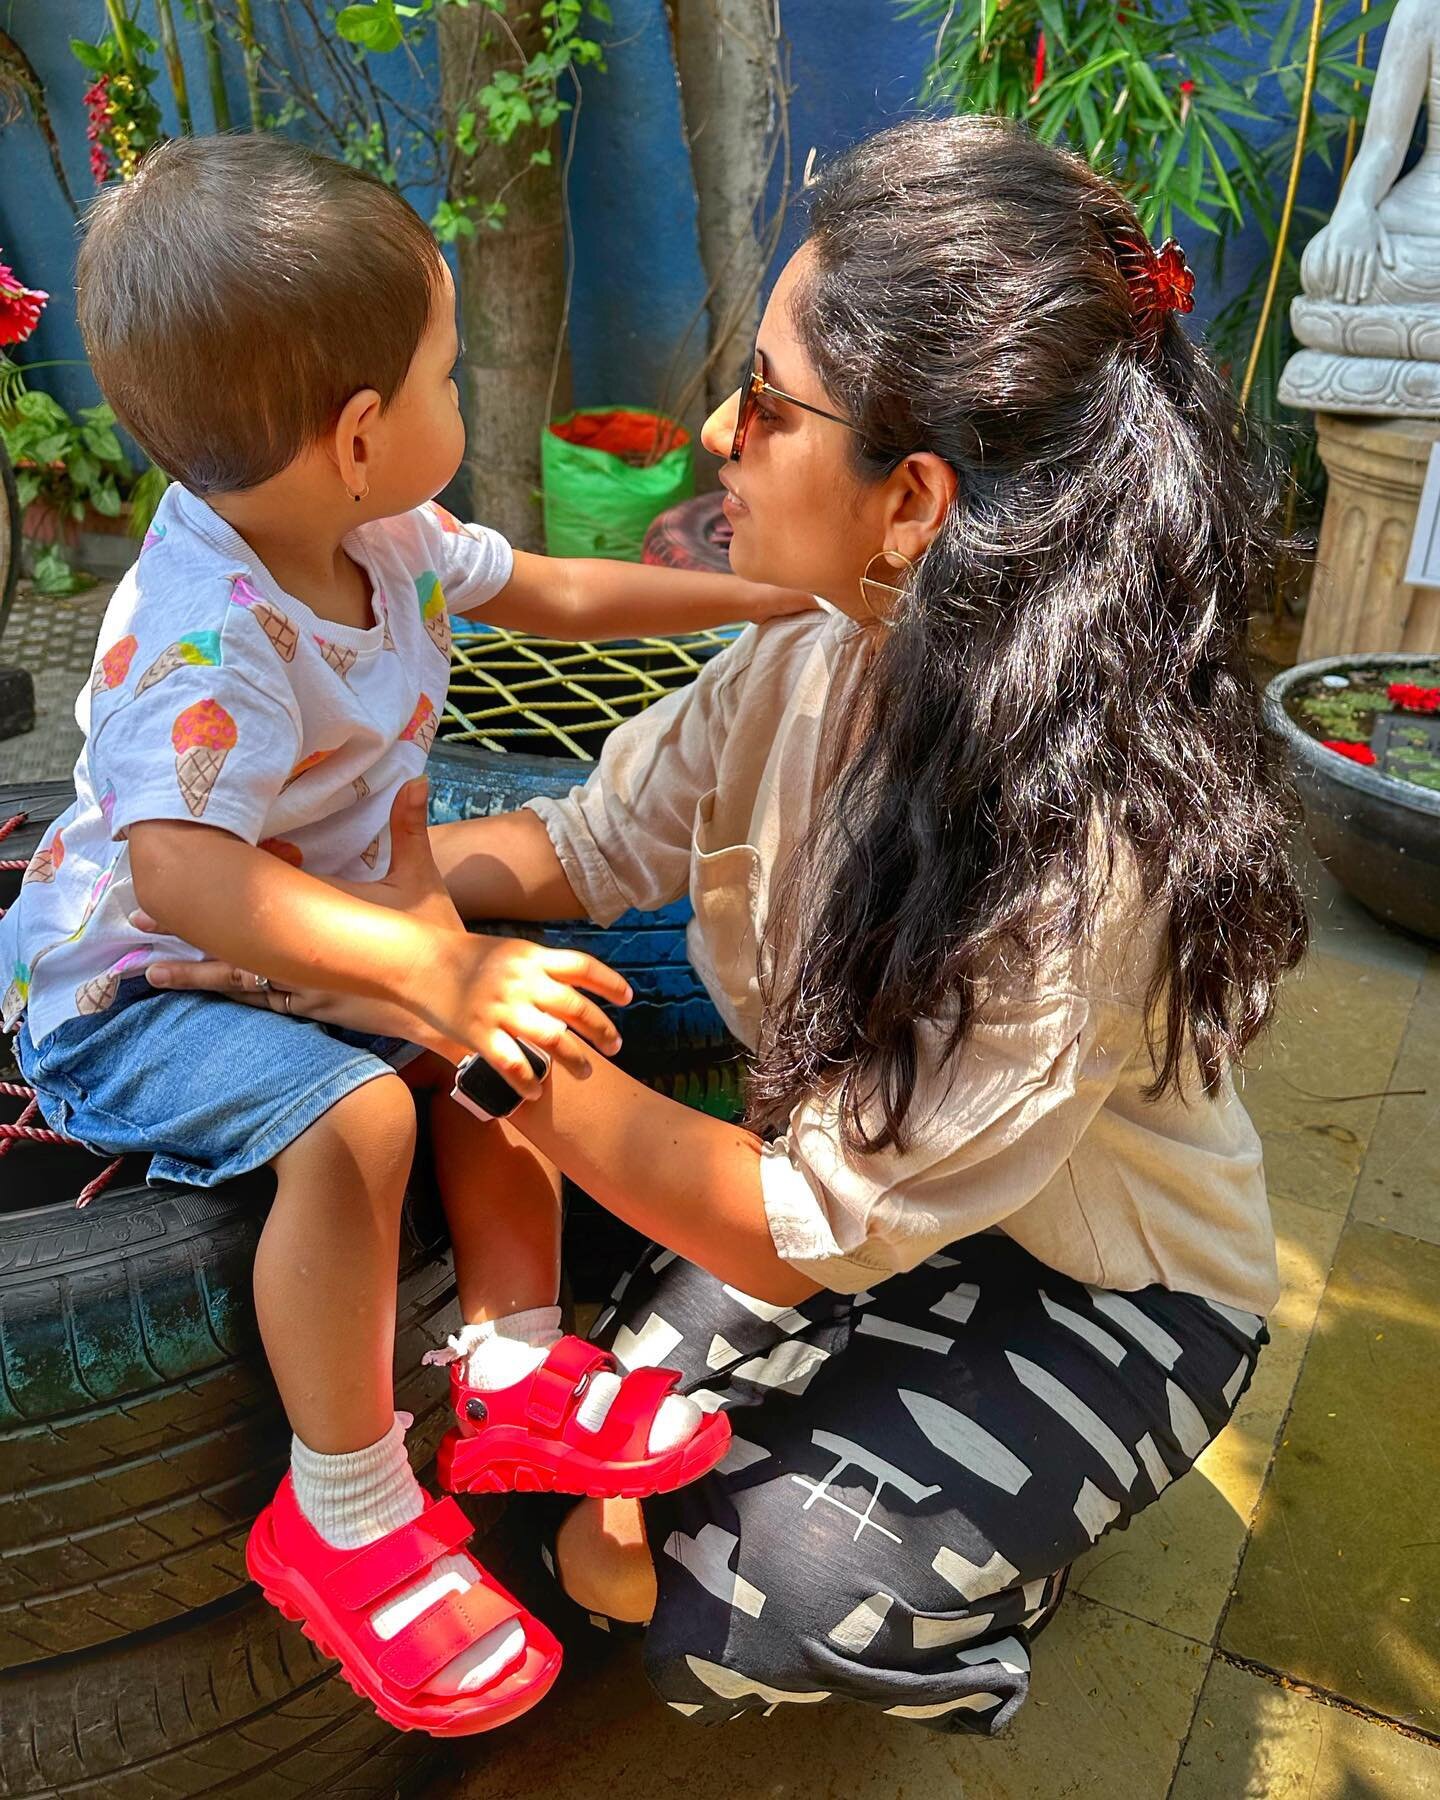 This one is dedicated to the one who has given me the title - &lsquo;mom&rsquo;&hellip; and to the one who does not want to click a single picture 😂😂😂
.
.
.
#mothersdayspecial #myworldmylife #mybaby #momlife #toddlermom